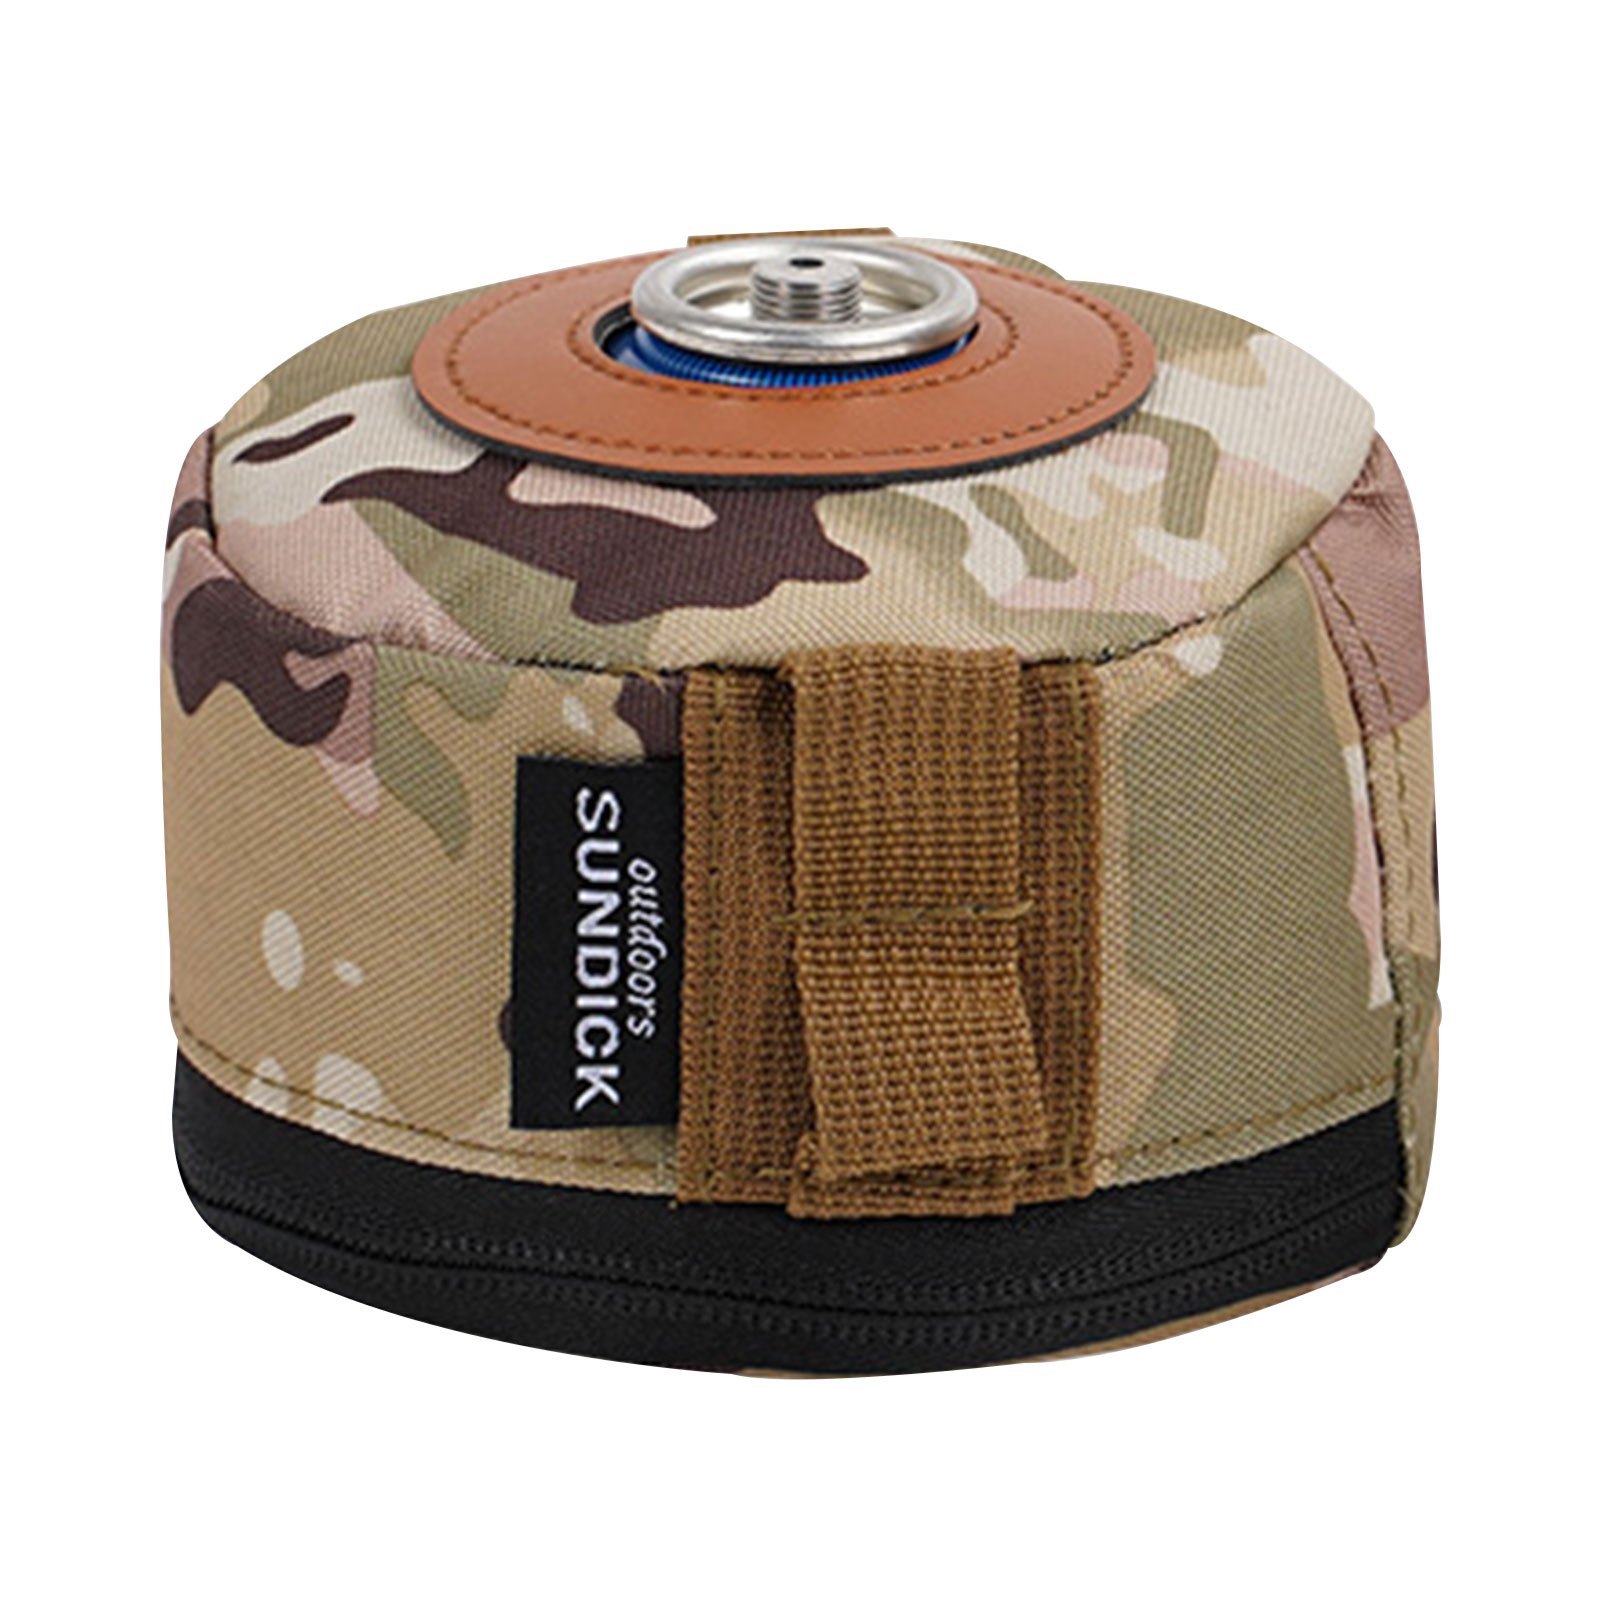 Gas Canister Cover Gas Tank Holder Storage Bag Outdoor Camping